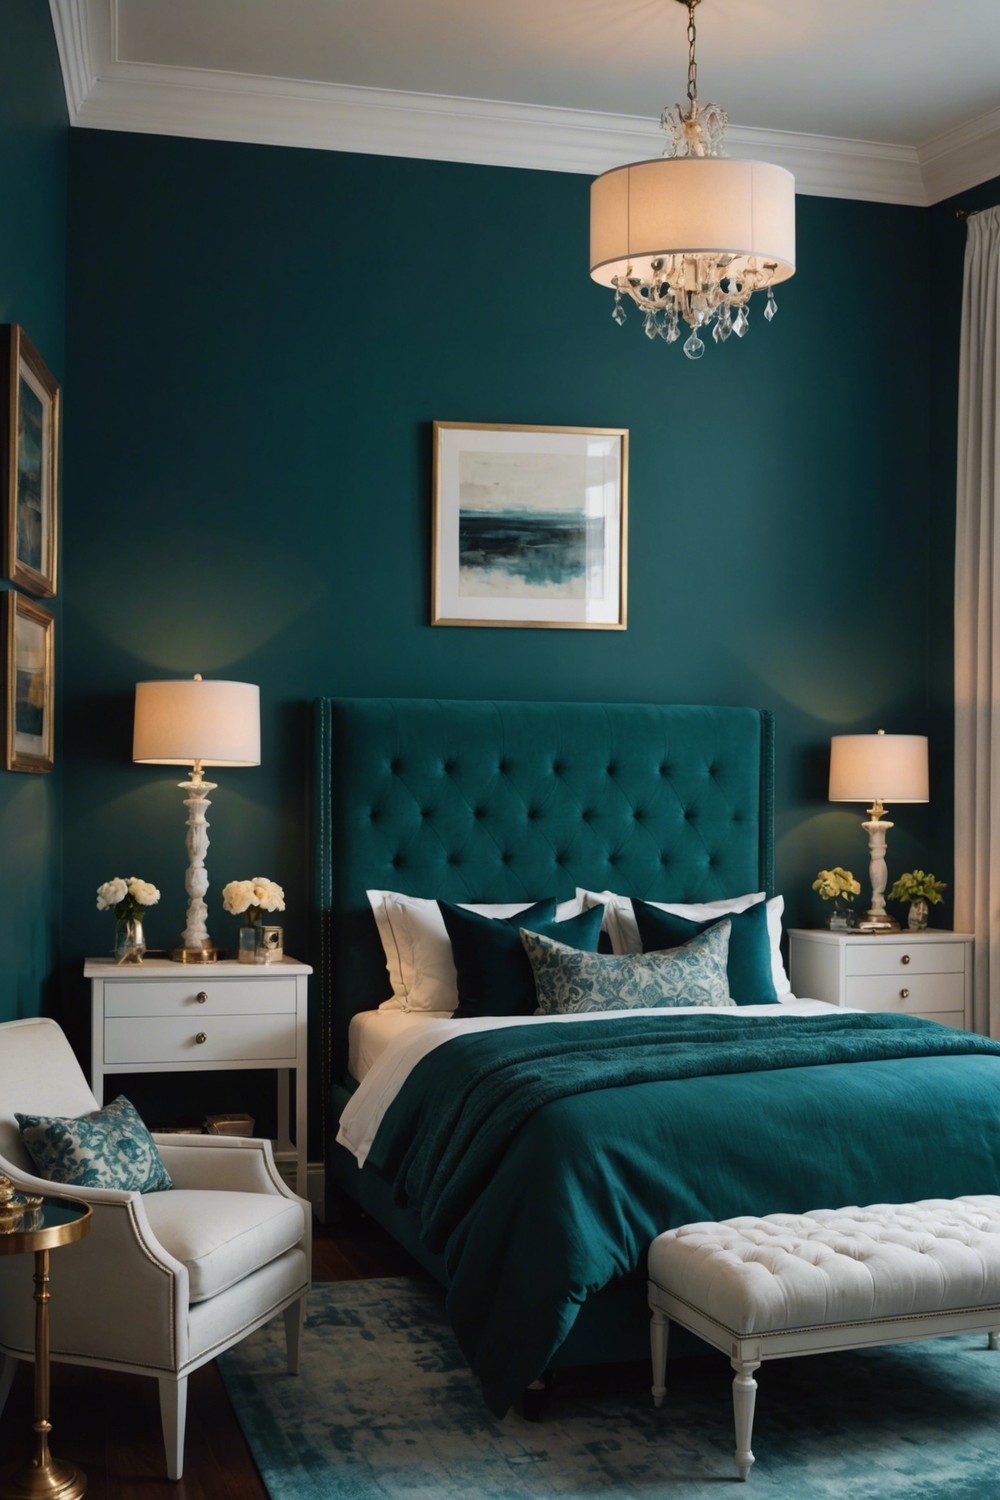 Moody and Dramatic: Dark Teal Bedroom